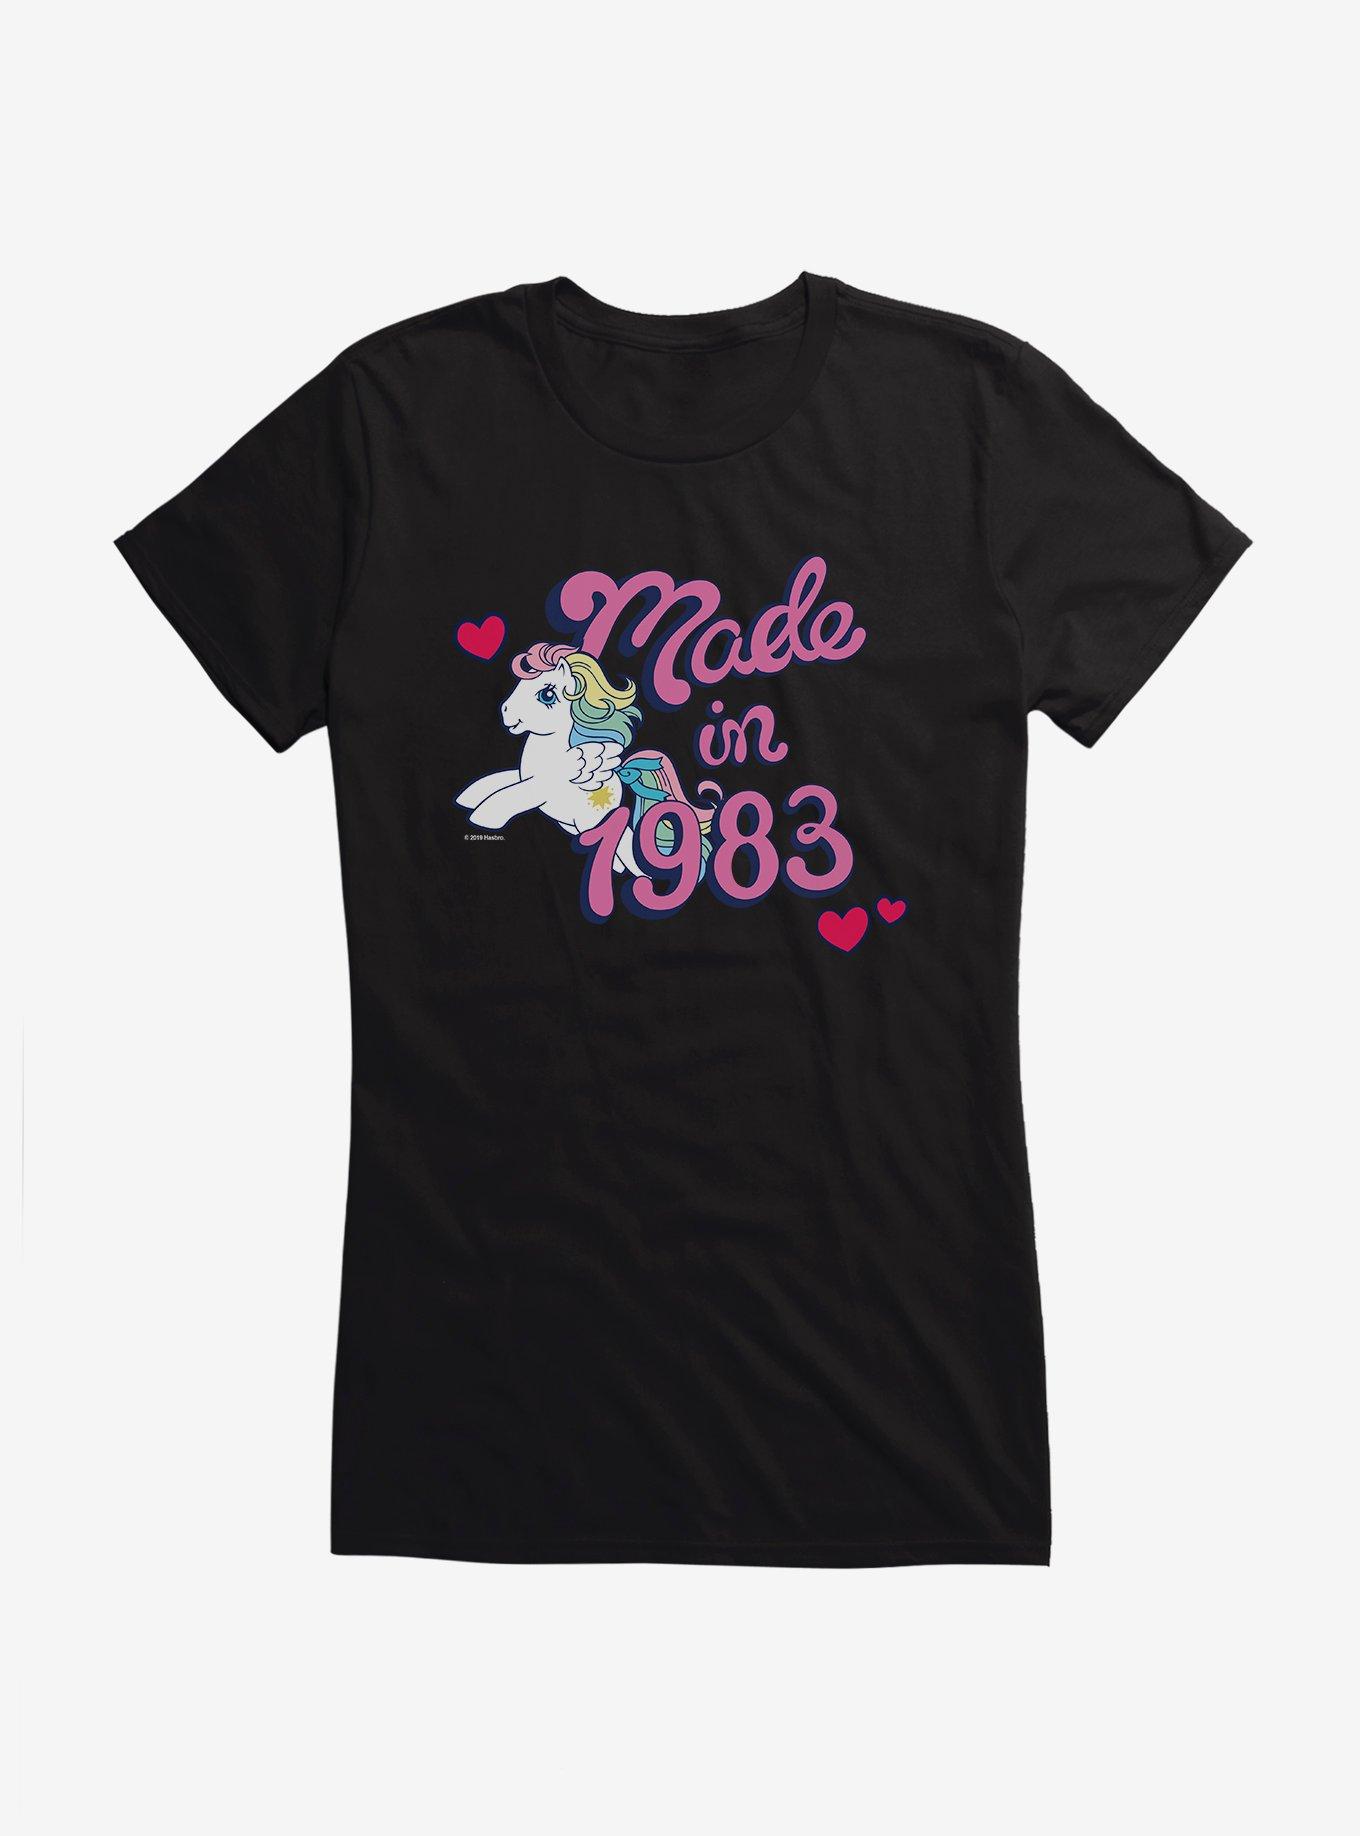 My Little Pony Made In 1983 Girls T-Shirt, BLACK, hi-res